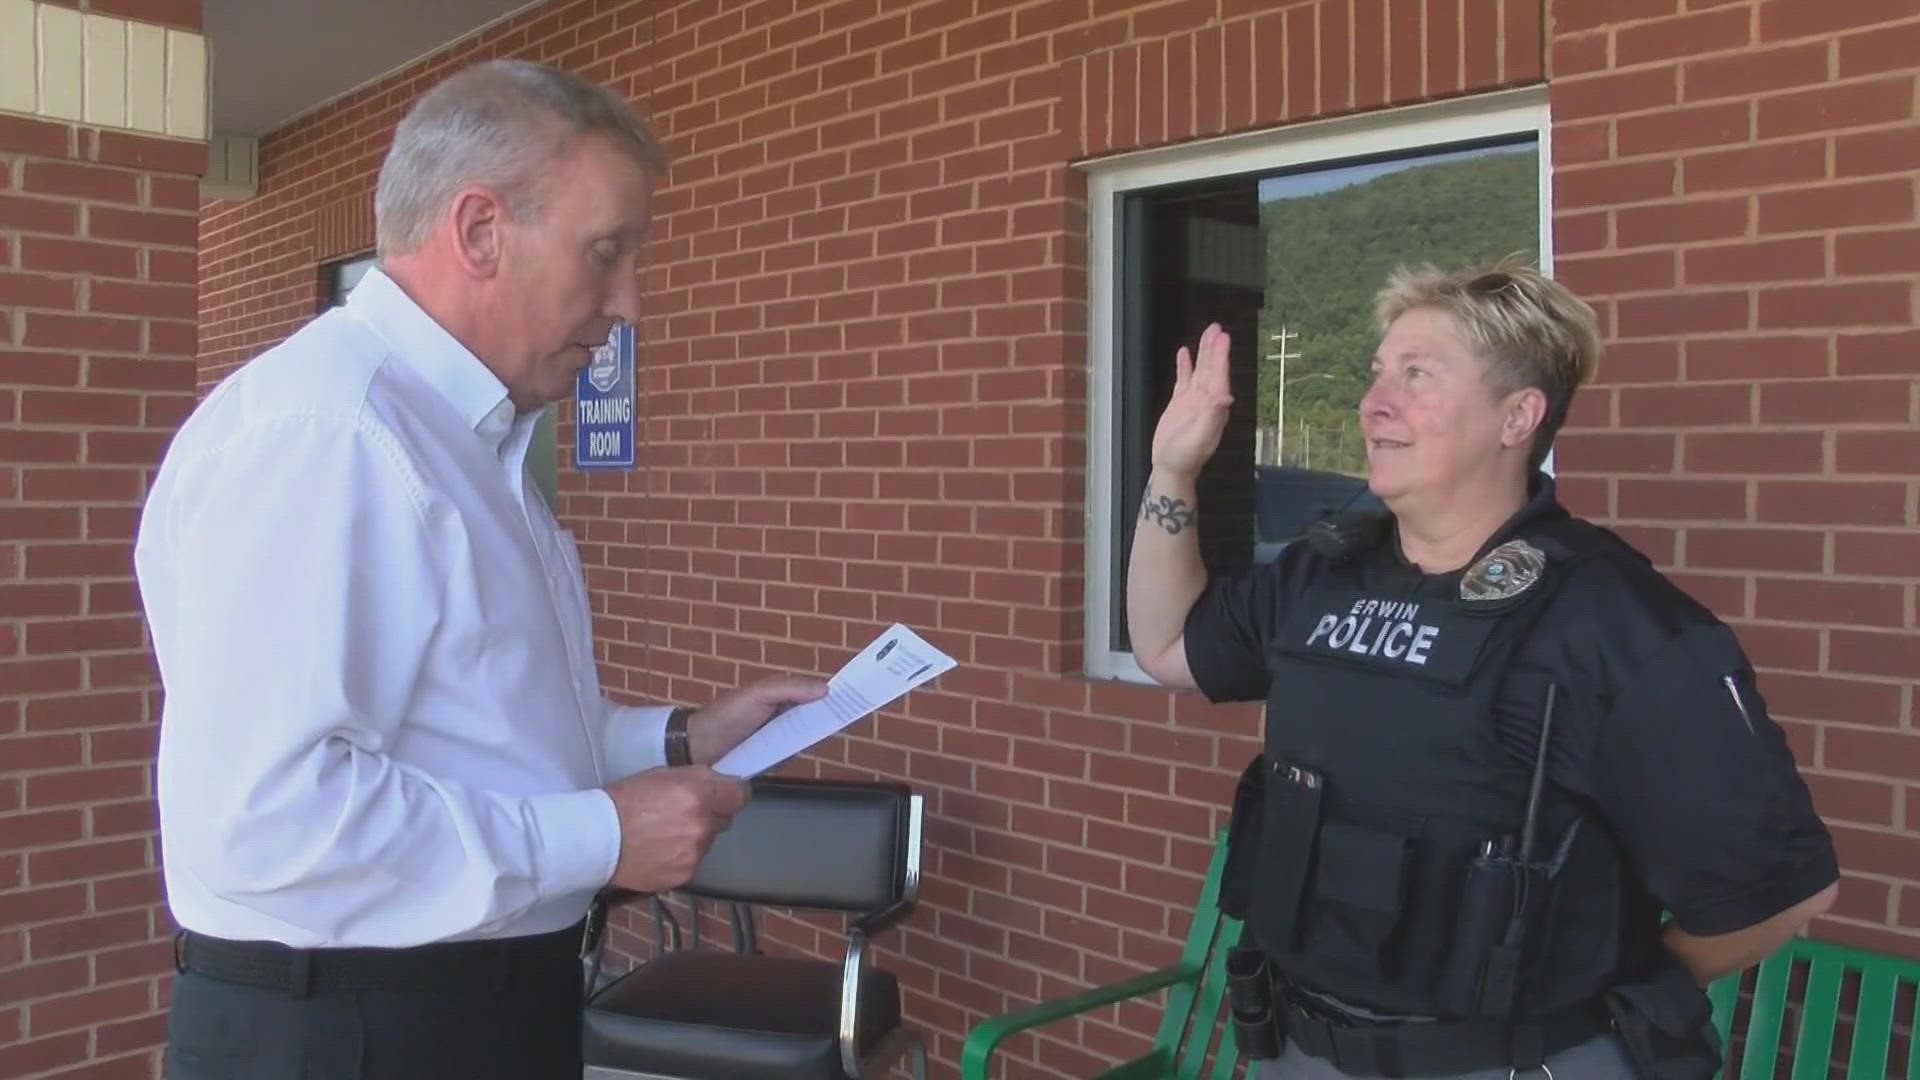 Tammy Ray was officially sworn in Tuesday as the first female police officer in the more than 130-year history of the Erwin Police Department.